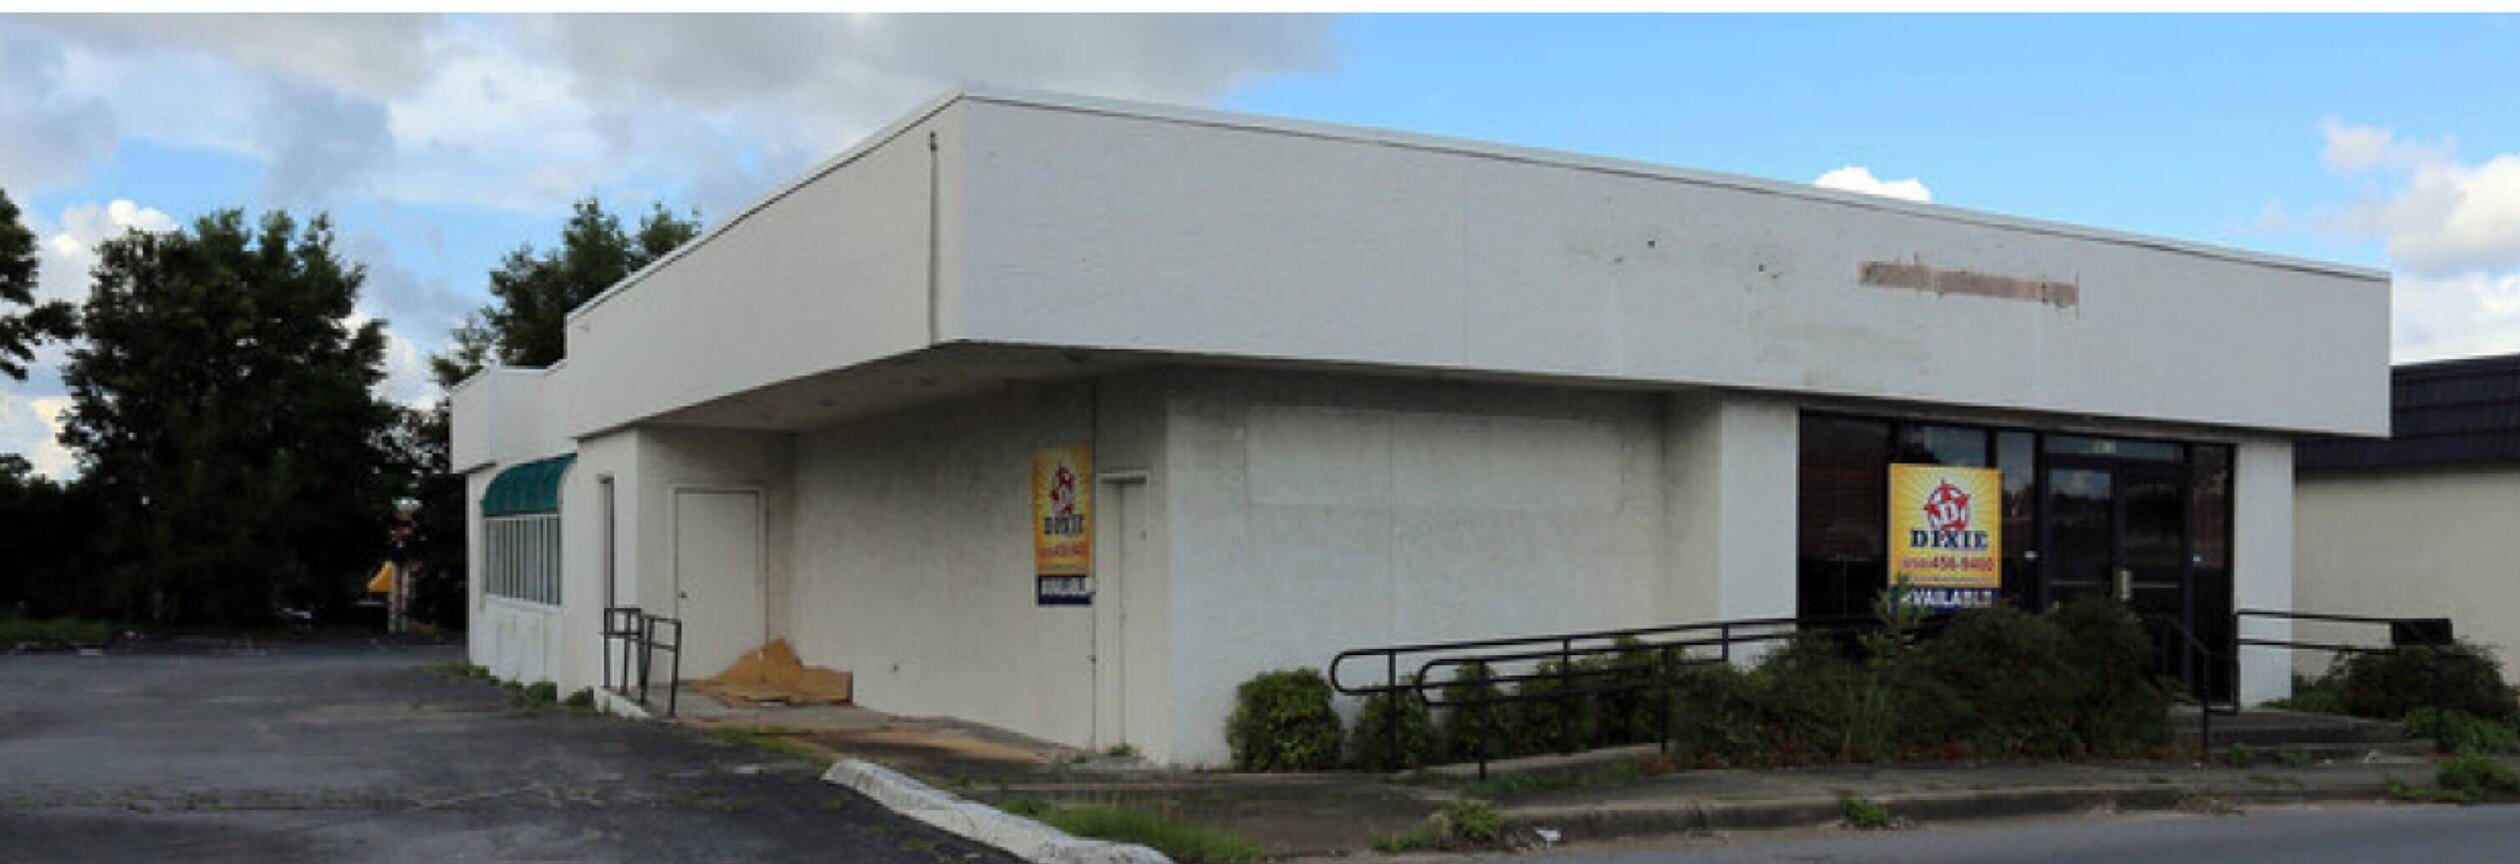 4014 SF FREE STANDING building FOR LEASE OR FOR SALEIdeal for Restaurant, Bank, Fast food QSR or any type of retail useRestaurant infrastructureLocated across from Cordova Mall largest shopping center ...